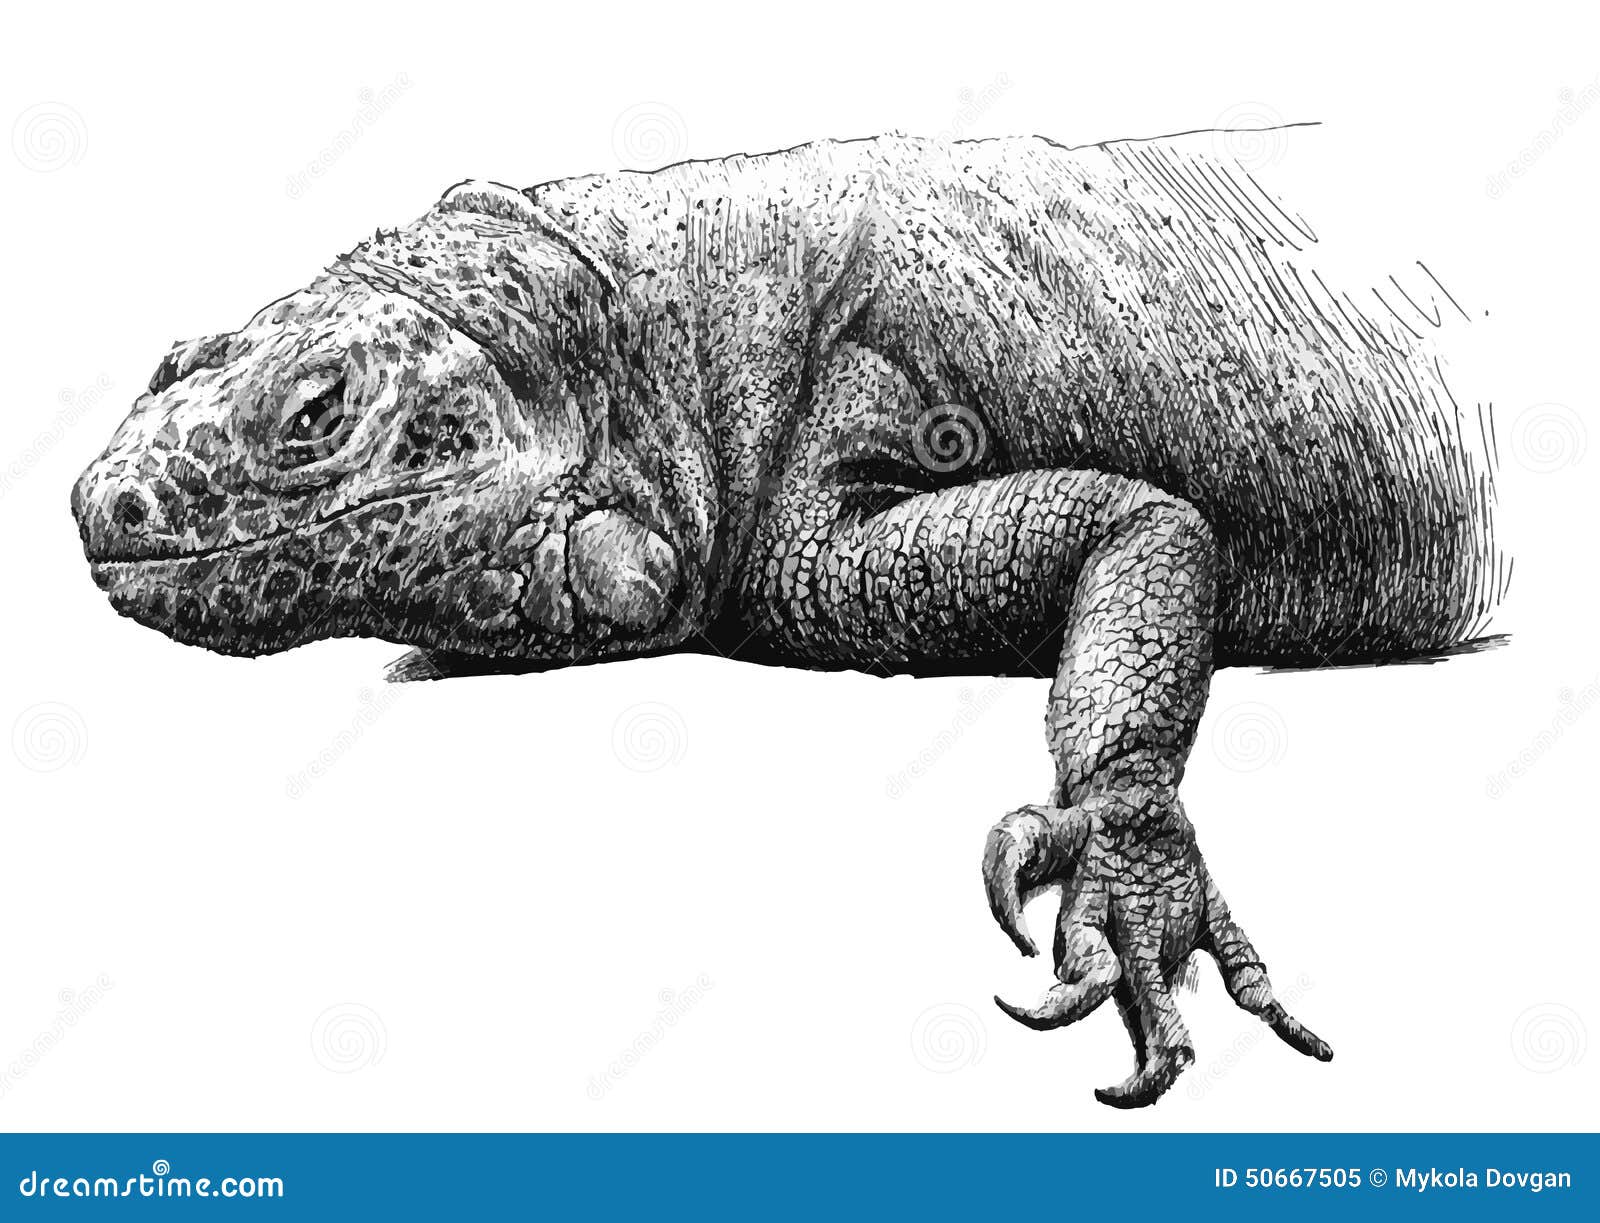 Illustration With A Large Iguana Stock Vector 